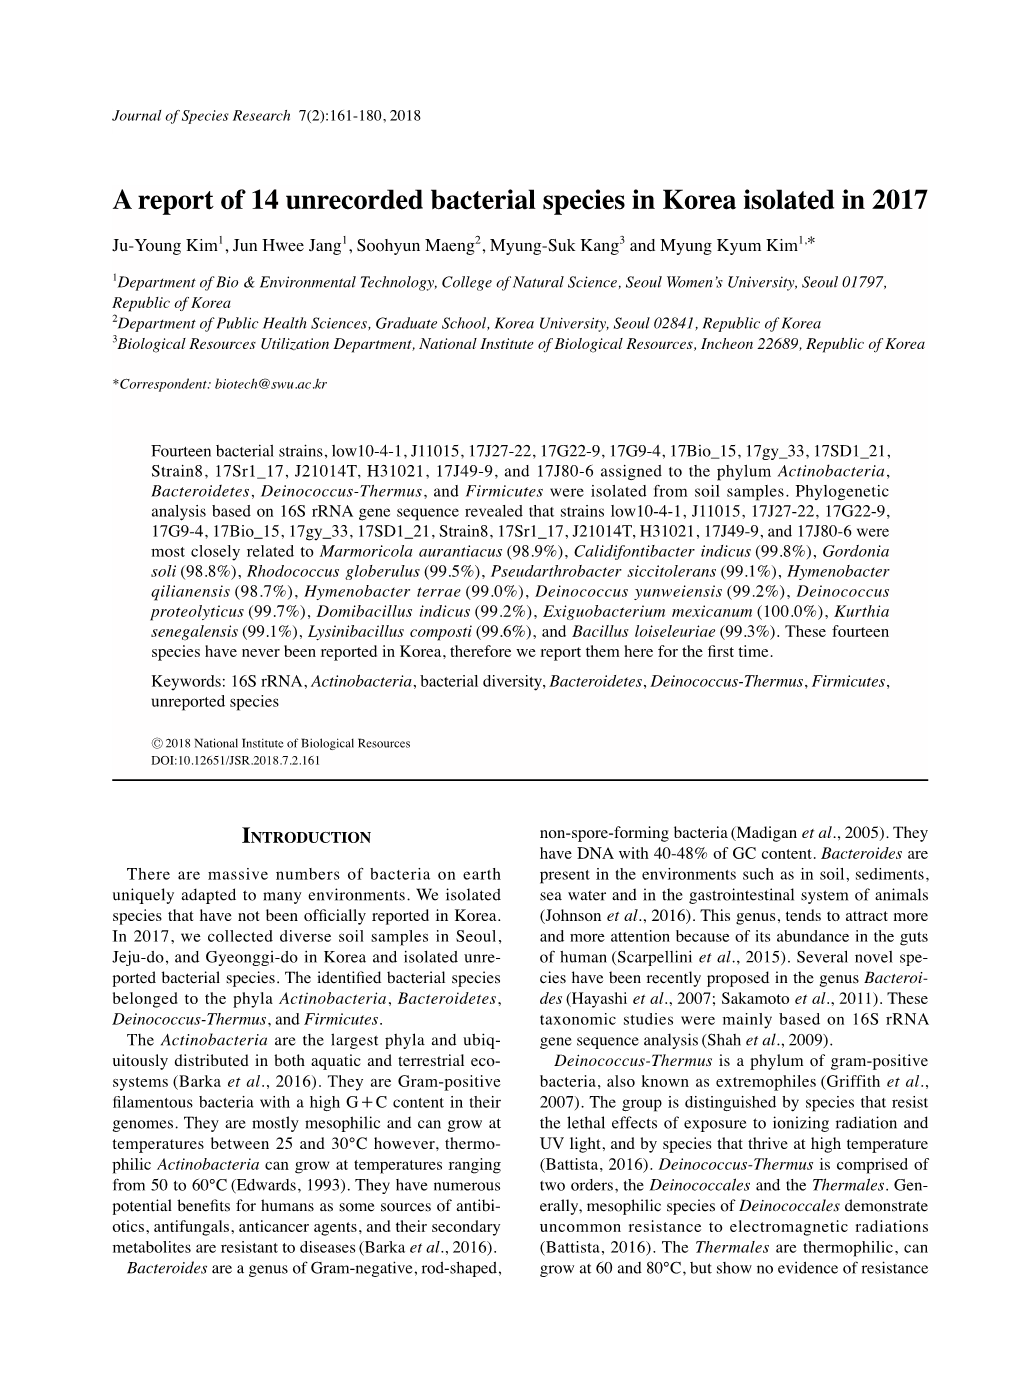 A Report of 14 Unrecorded Bacterial Species in Korea Isolated in 2017